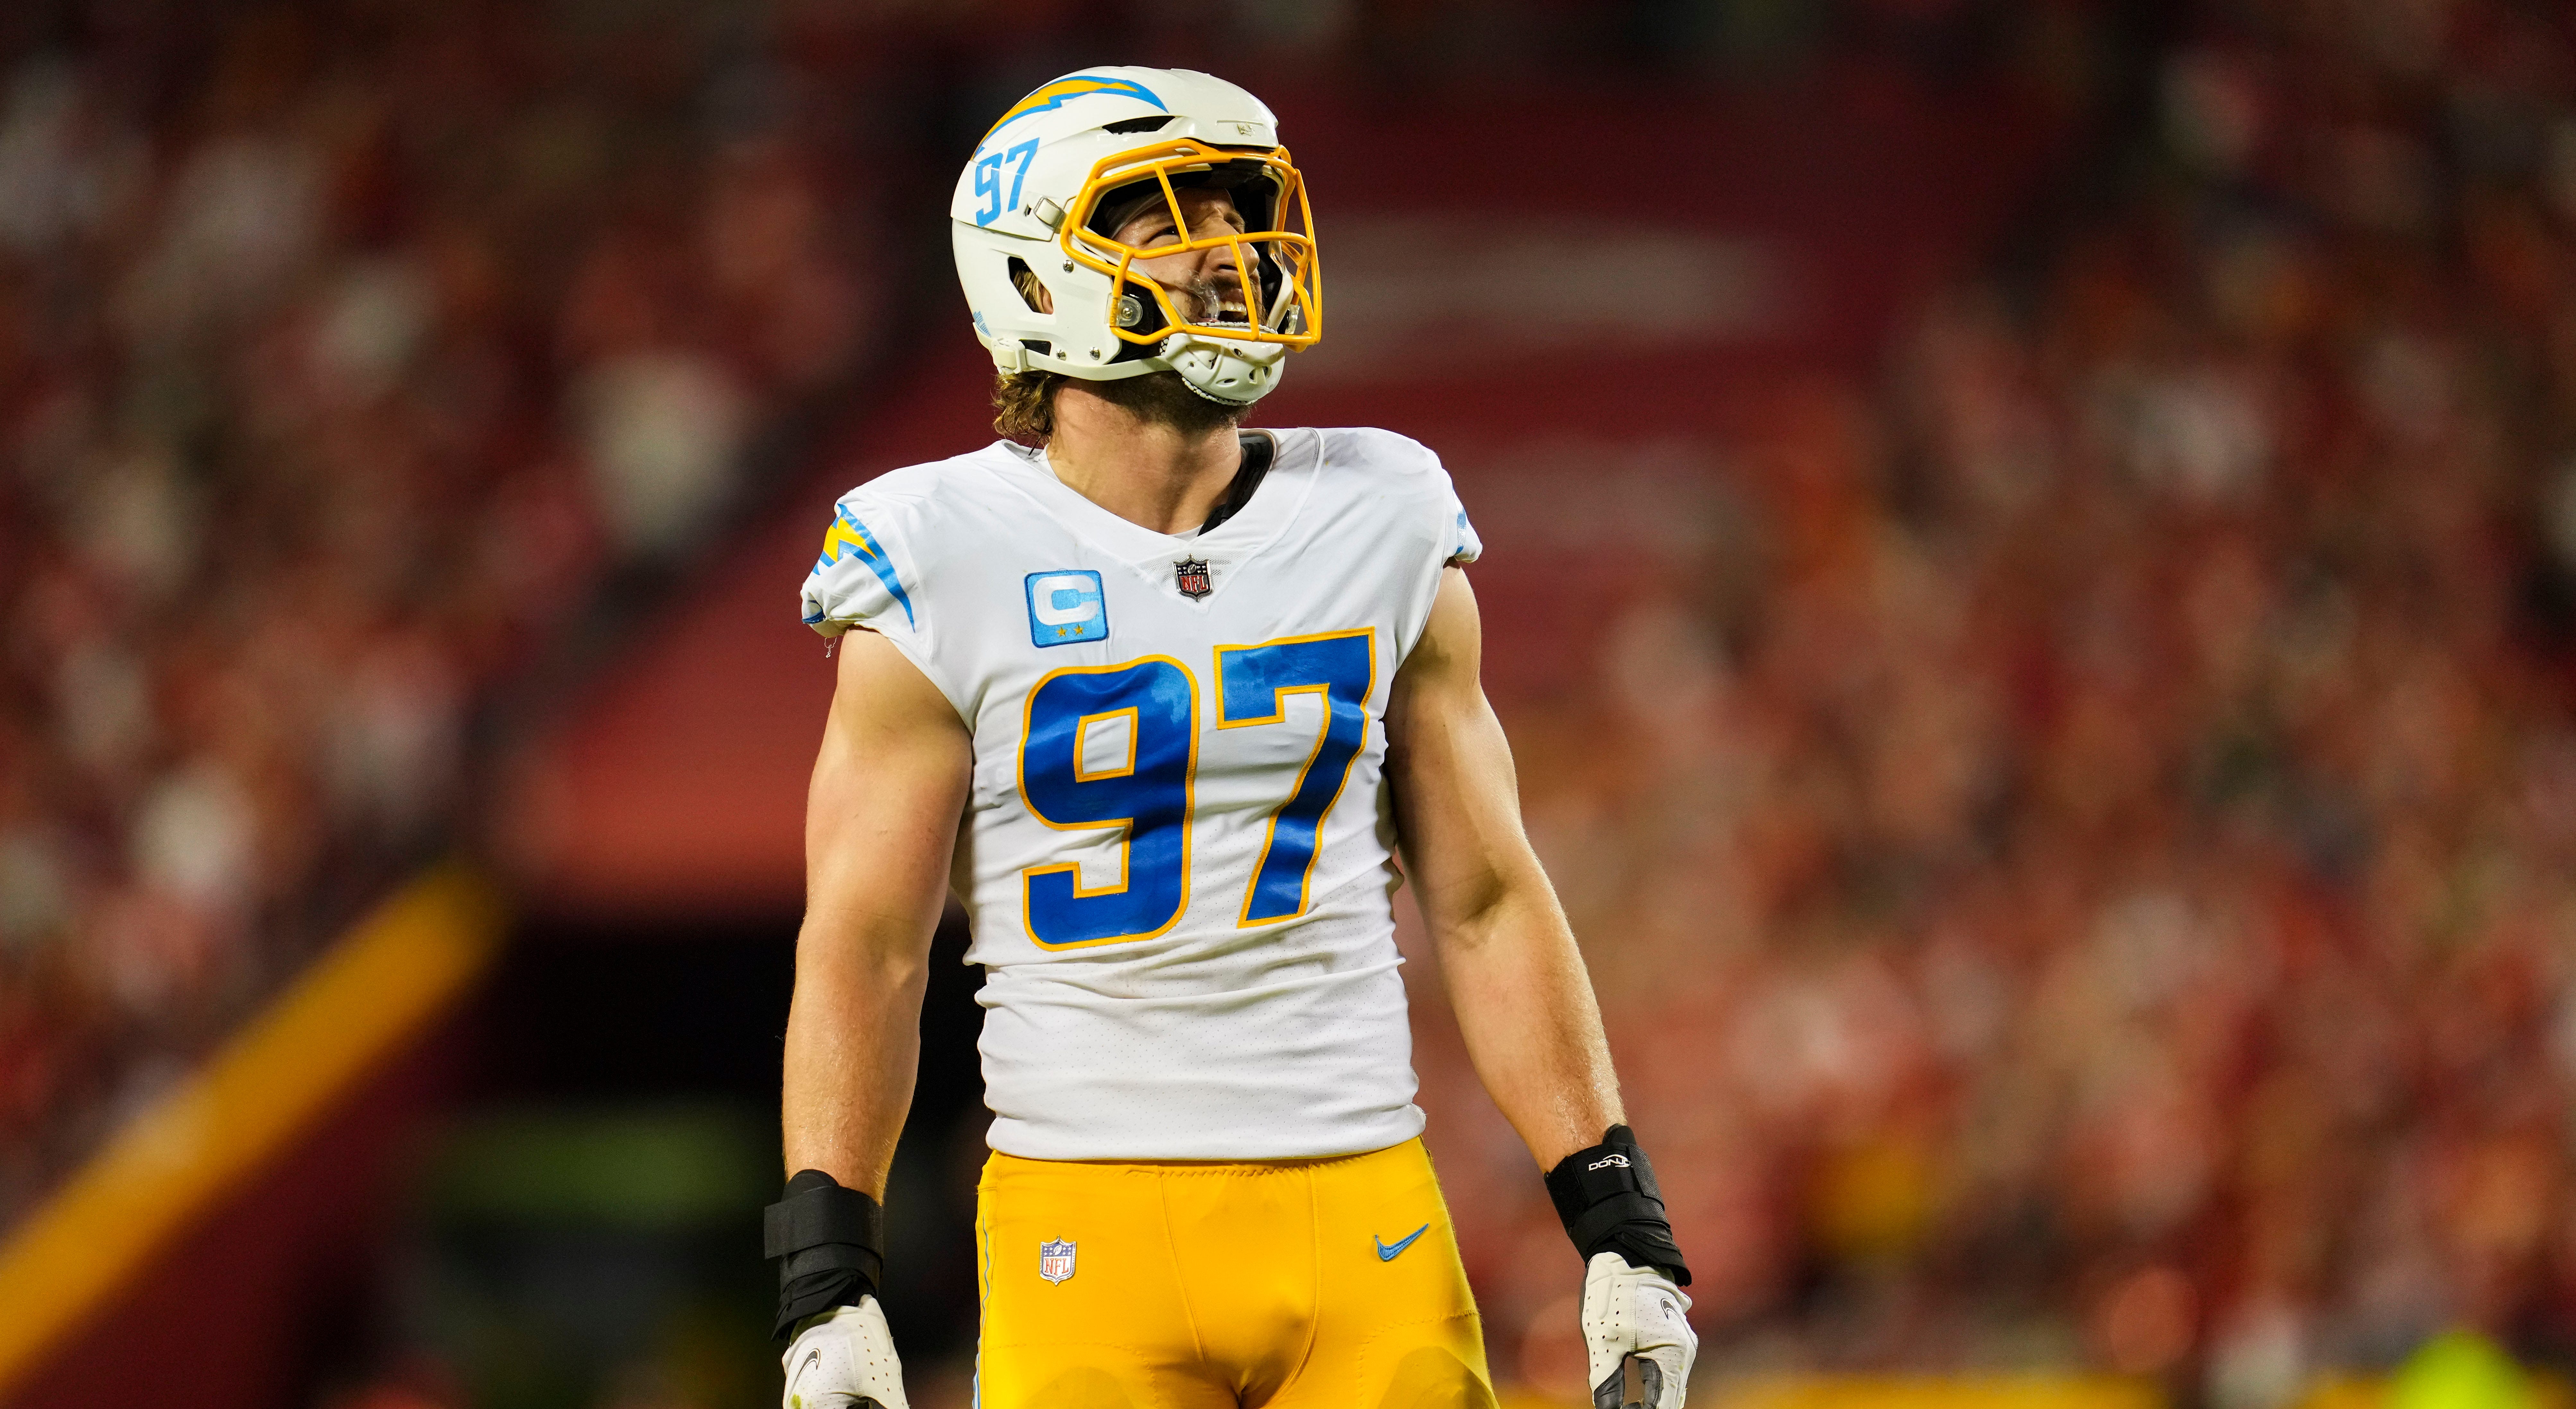 Chargers' Joey Bosa makes powerful statement by adding weight, losing hair, National Sports